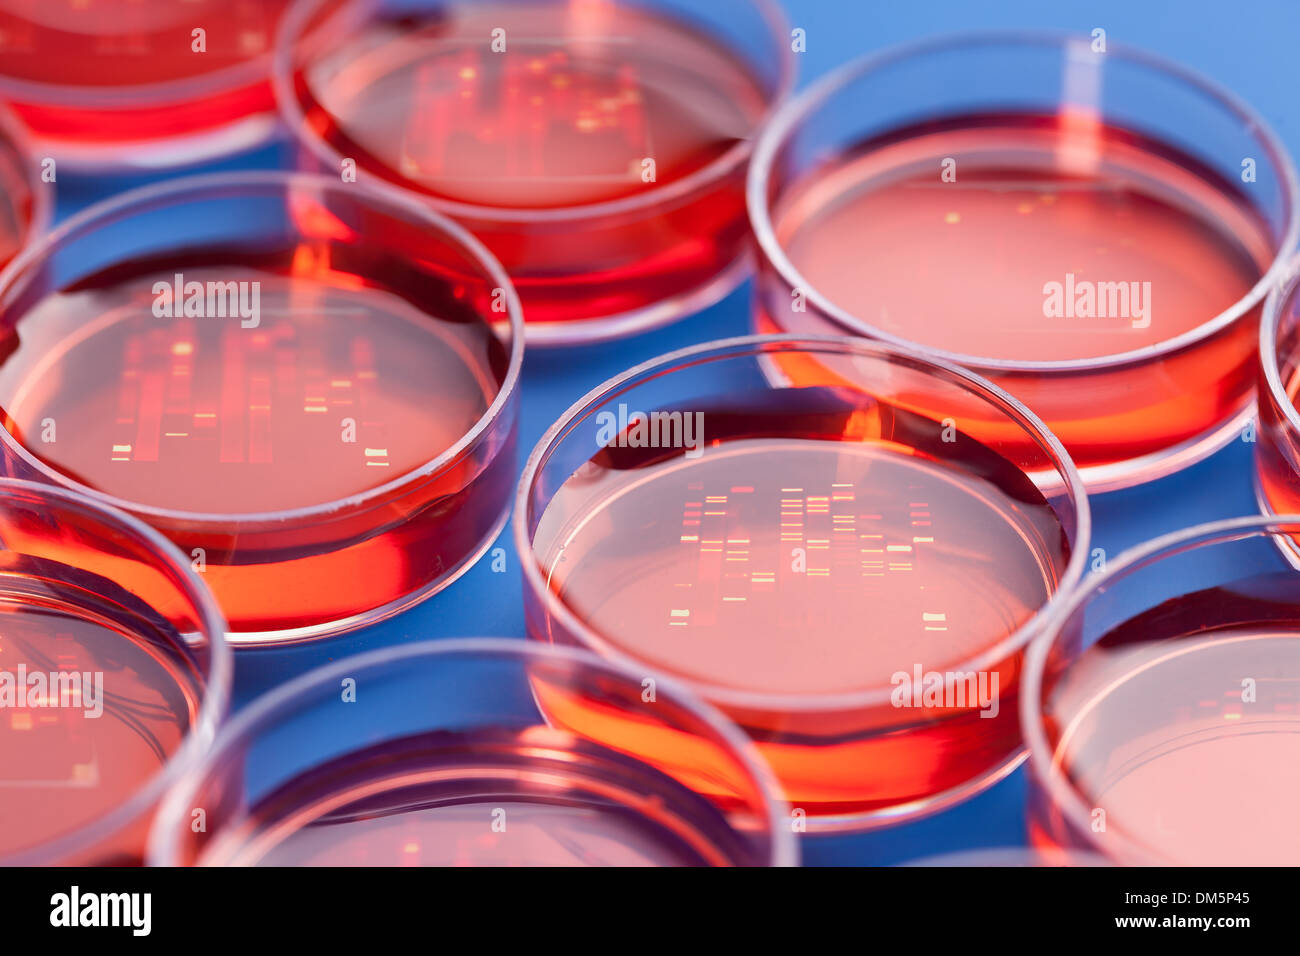 Petri dishes with samples for DNA sequencing Stock Photo